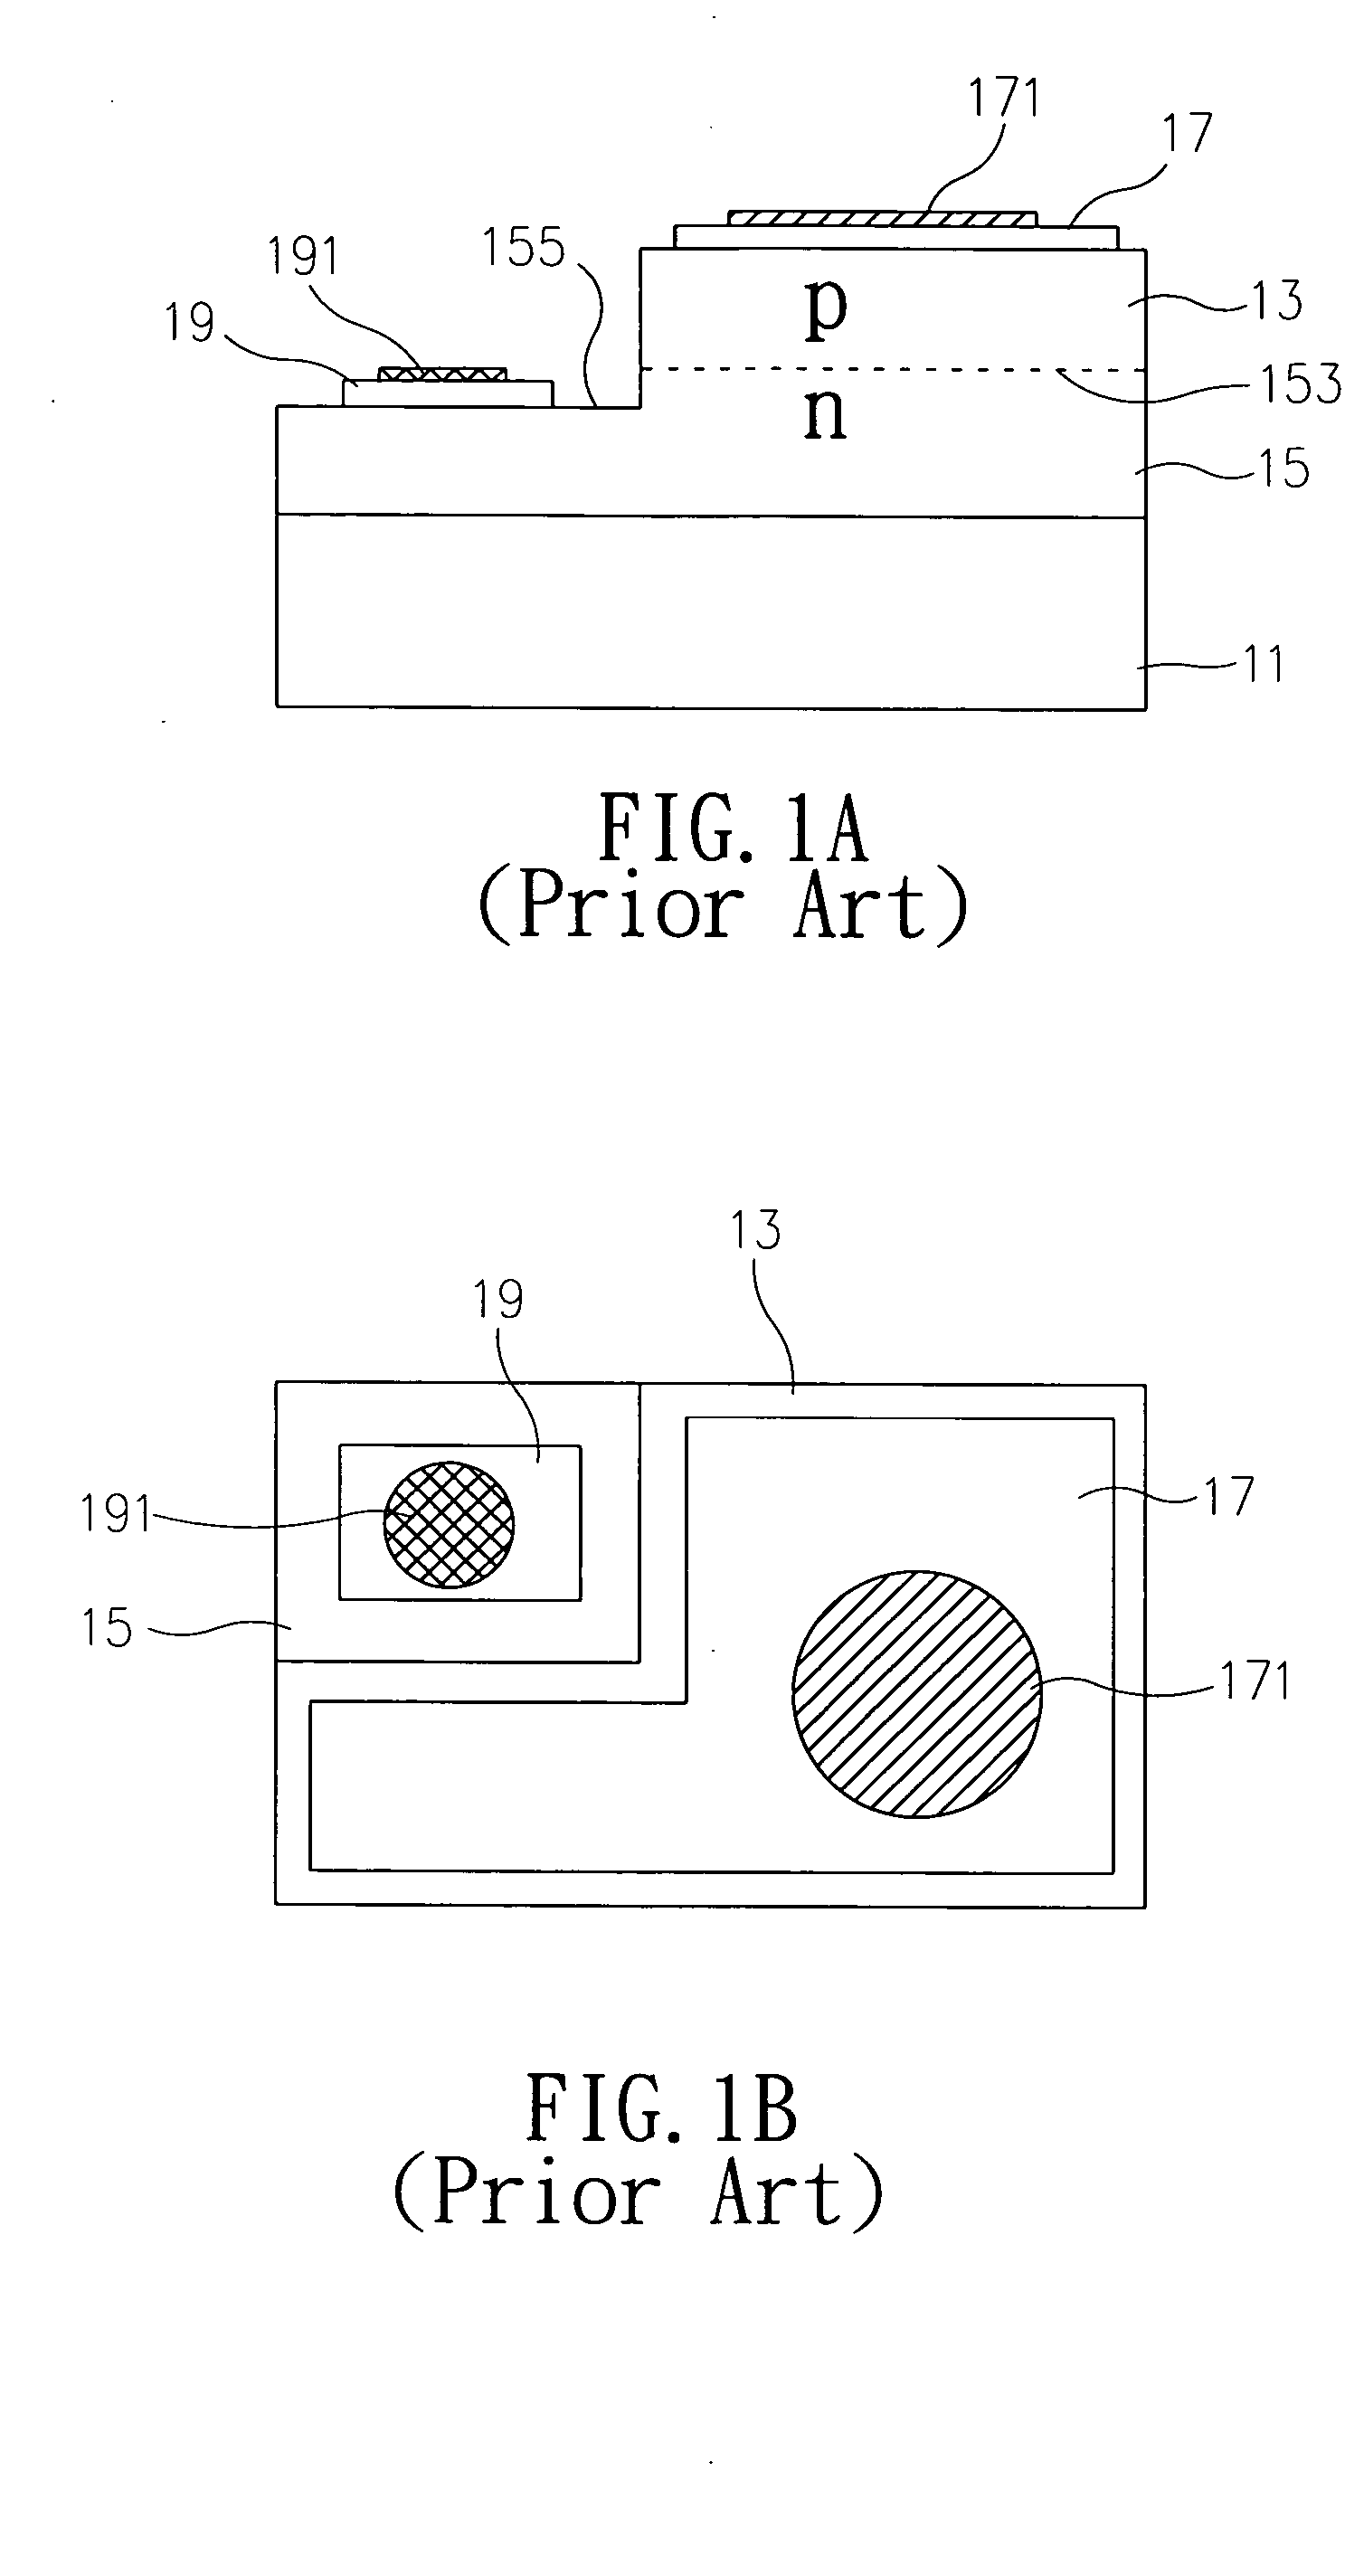 Light-emitting device with enlarged area of active luminescence region